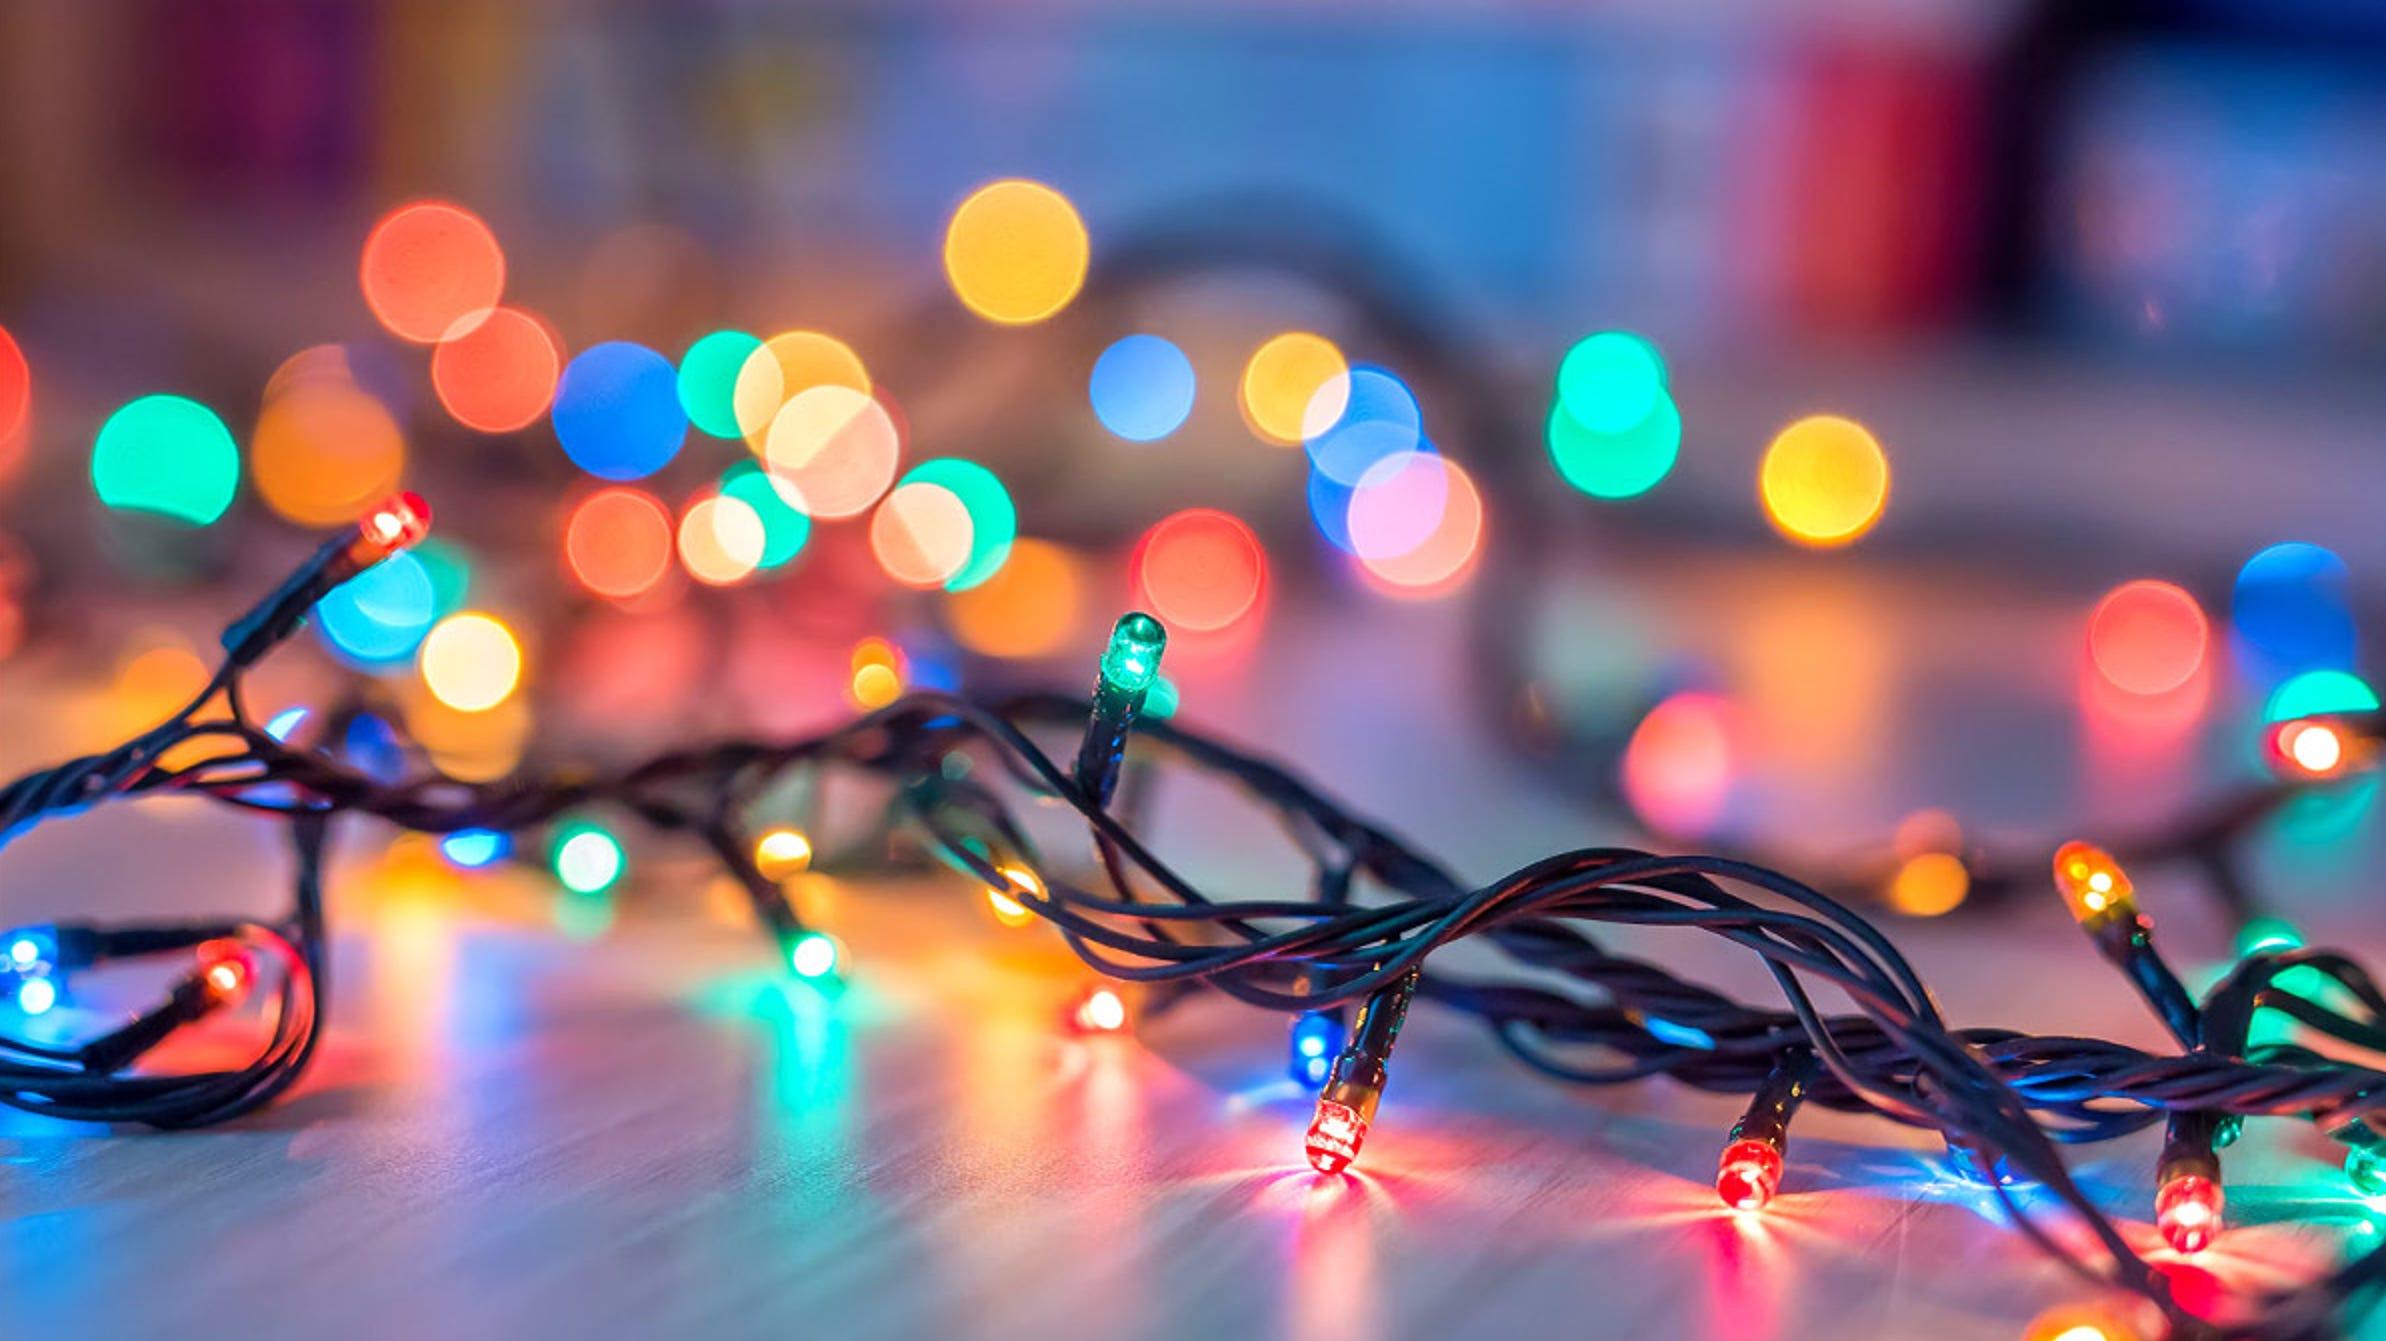 What Are The Pros And Cons Of Led Christmas Lights